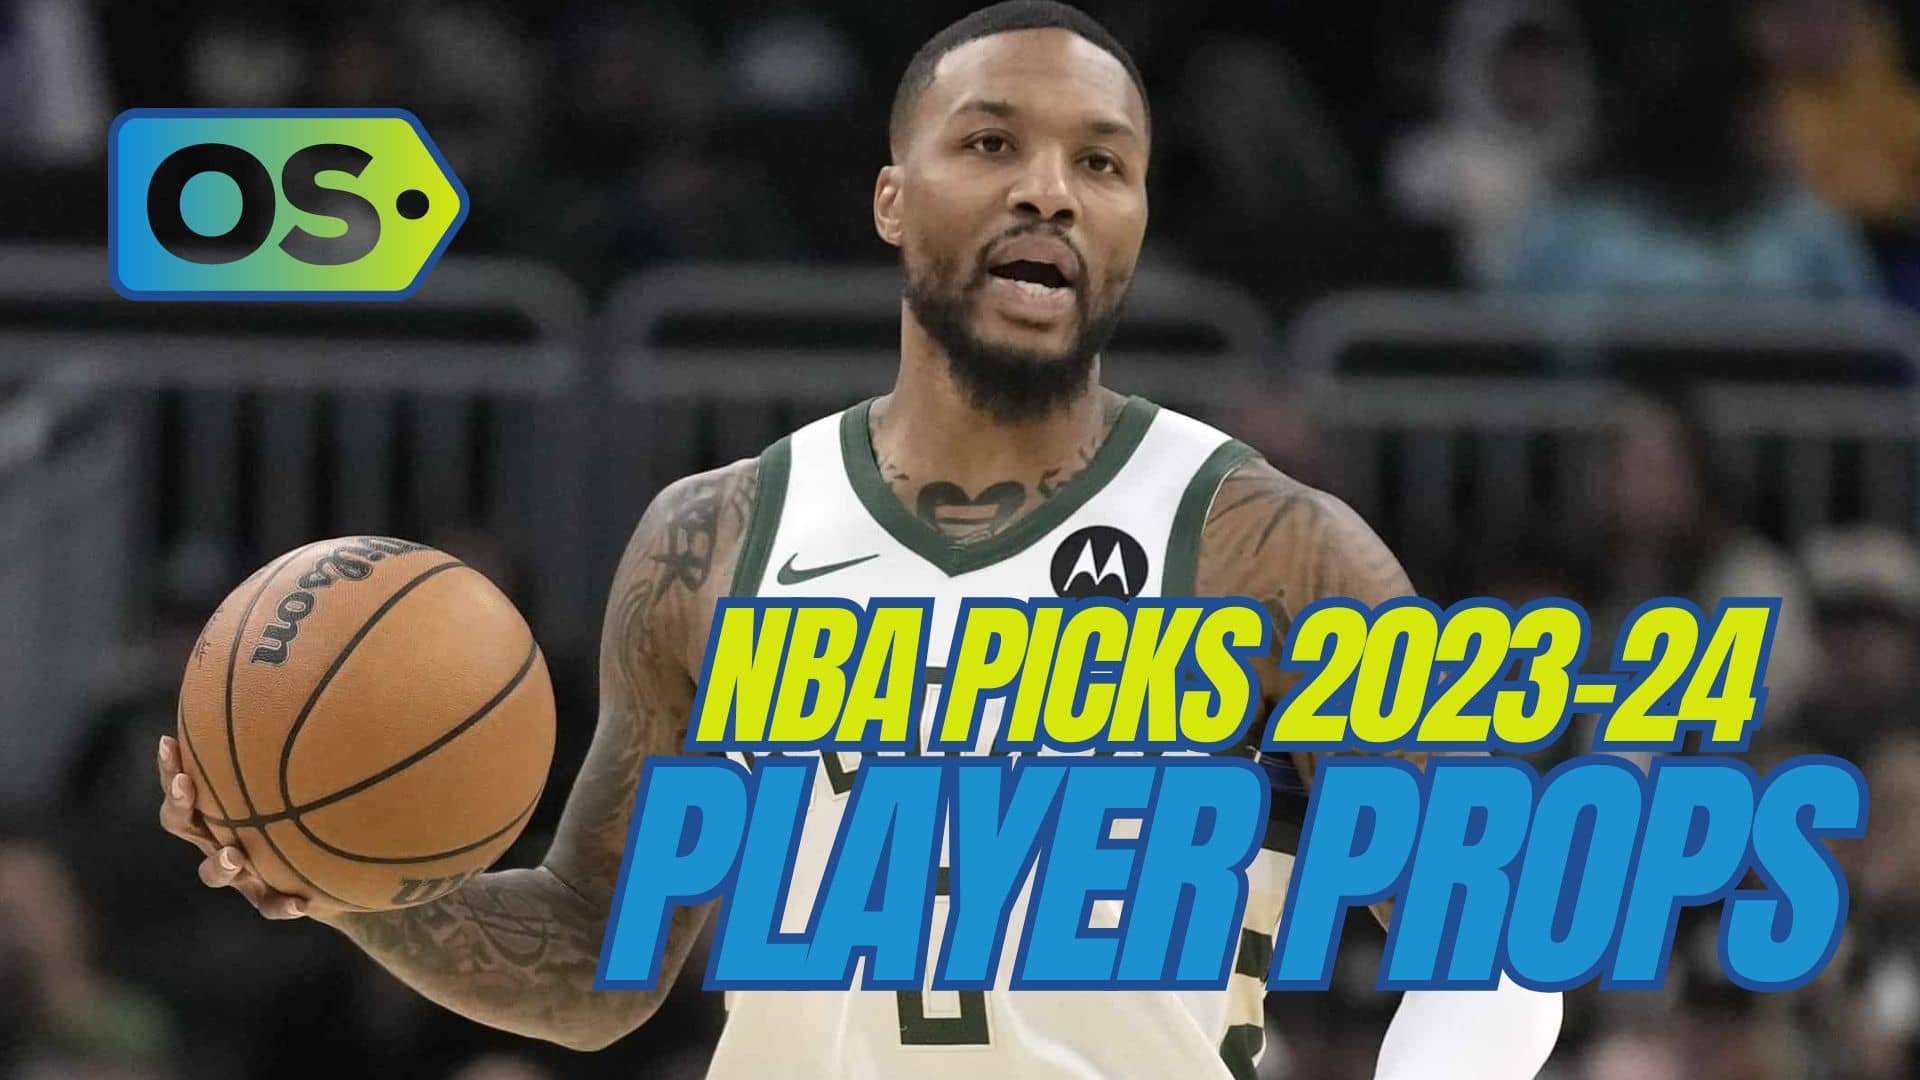 The best NBA player prop bets and picks today for Wednesday, March 20, include wagers on Damian Lillard and Deandre Ayton...